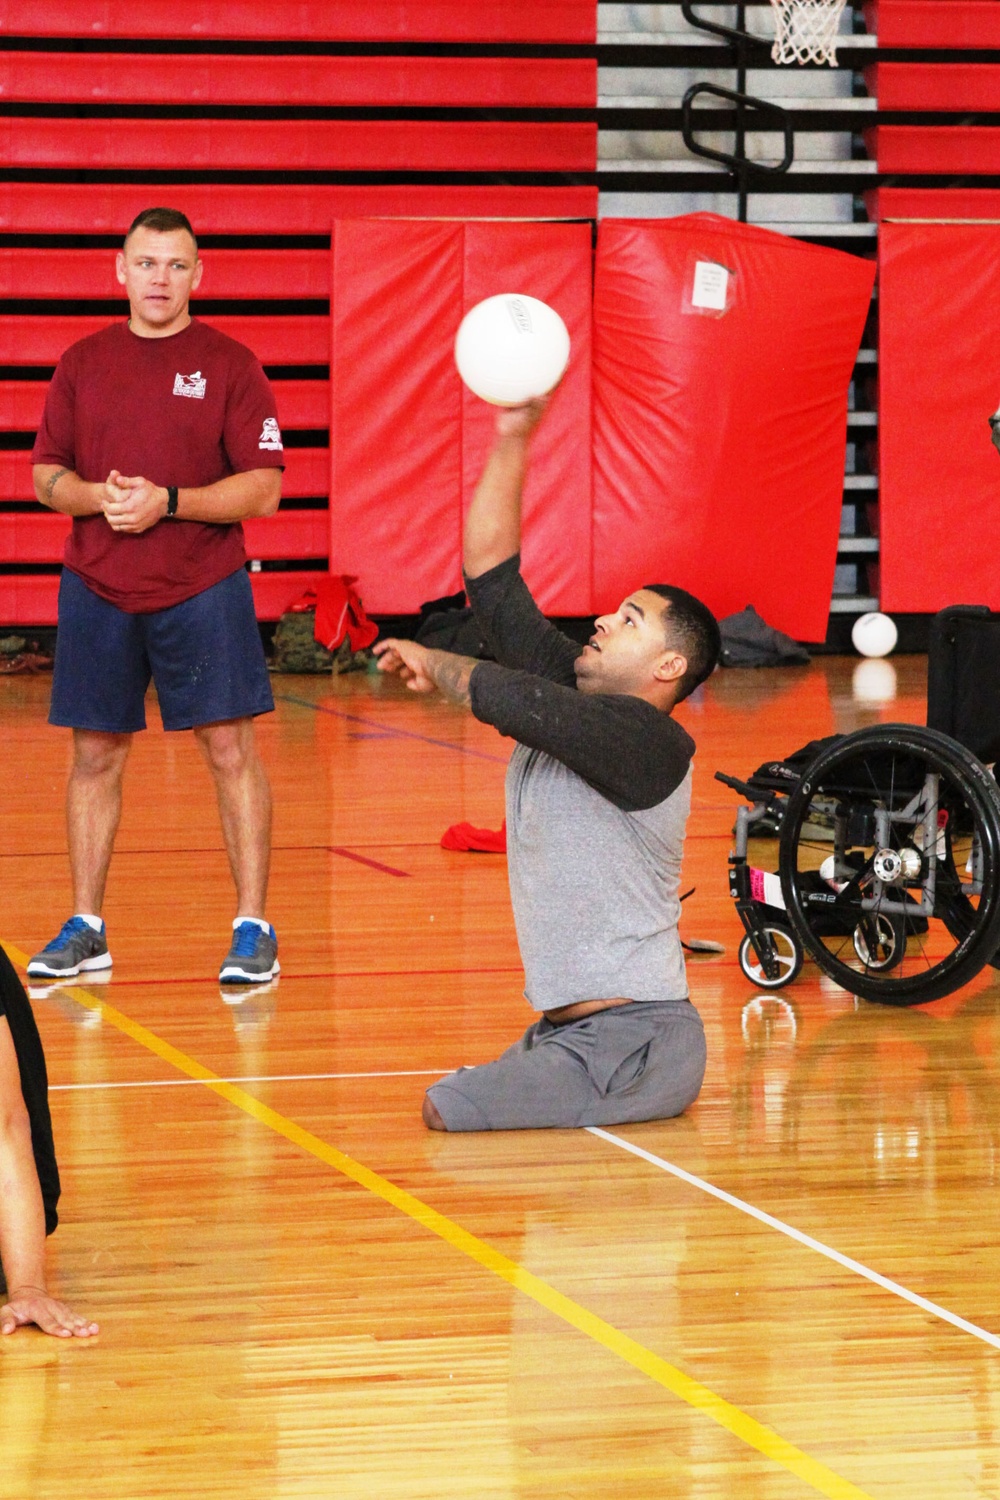 Wounded Warrior Regiment conducts sitting volleyball camp for Warrior Care Month